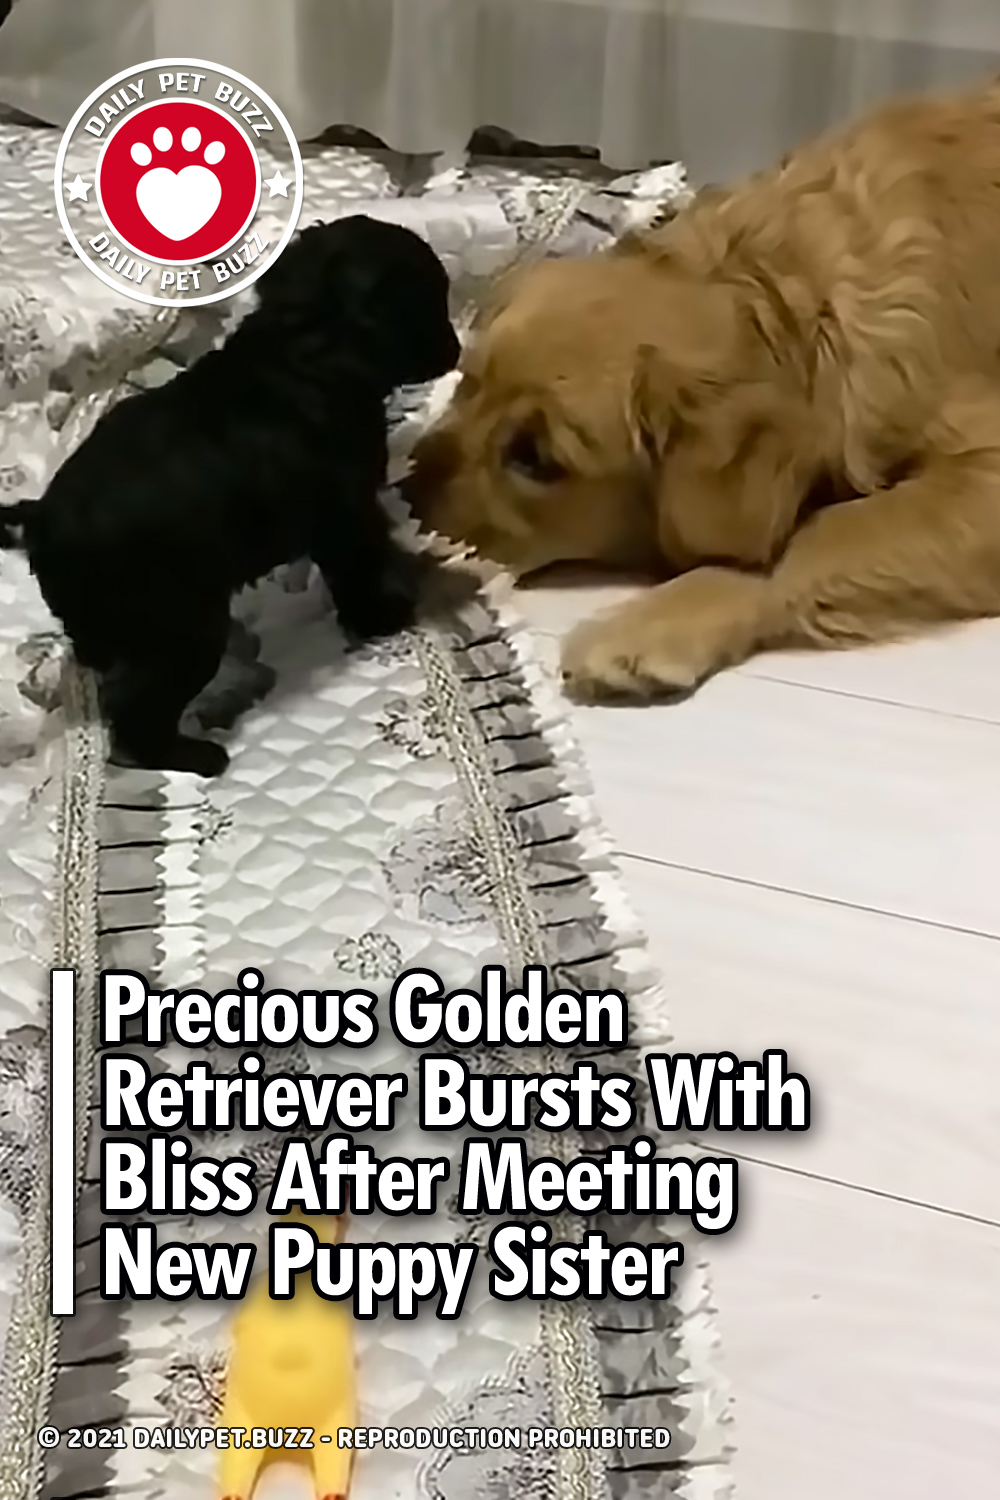 Precious Golden Retriever Bursts With Bliss After Meeting New Puppy Sister